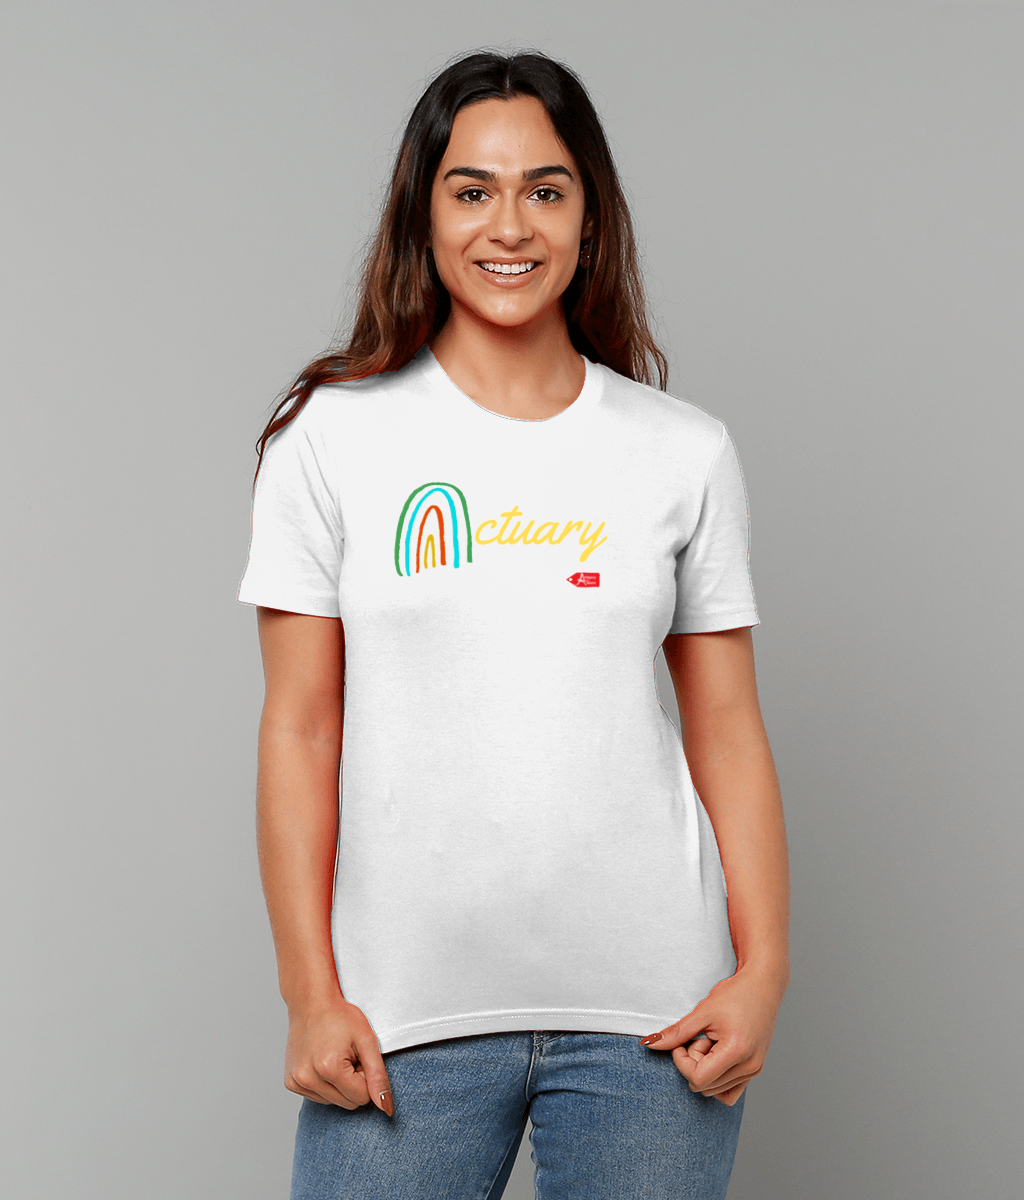 Rainbow A Actuary T-Shirt (Black and White Variants)